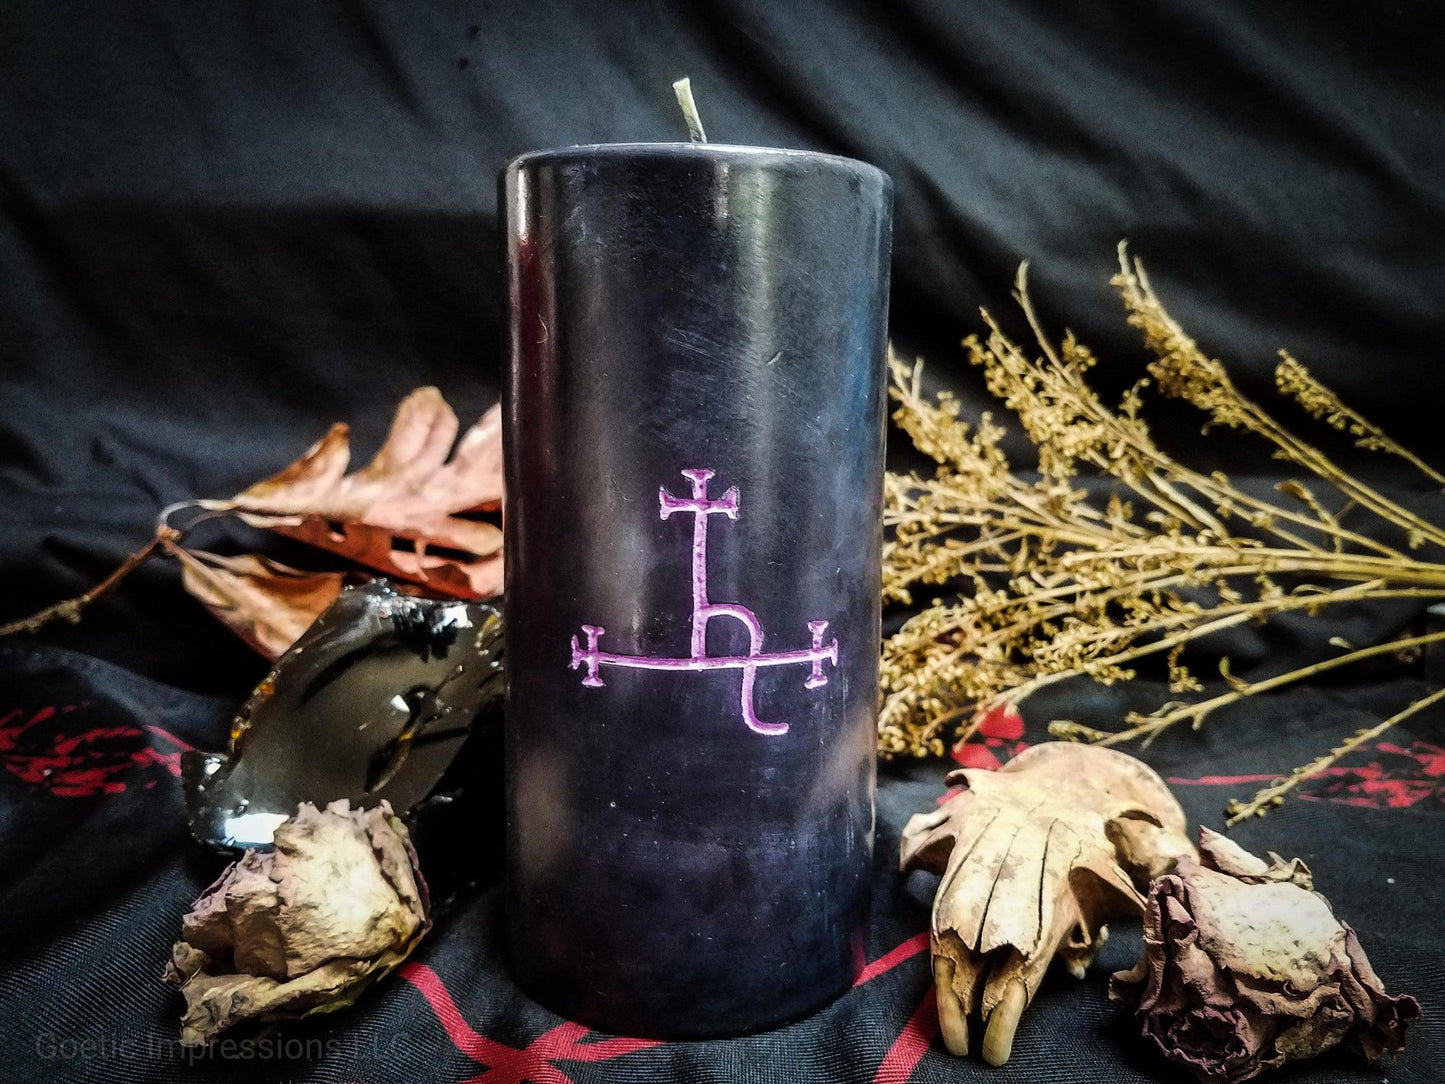 Black pillar candle with purple Lilith Sigil carved into it.